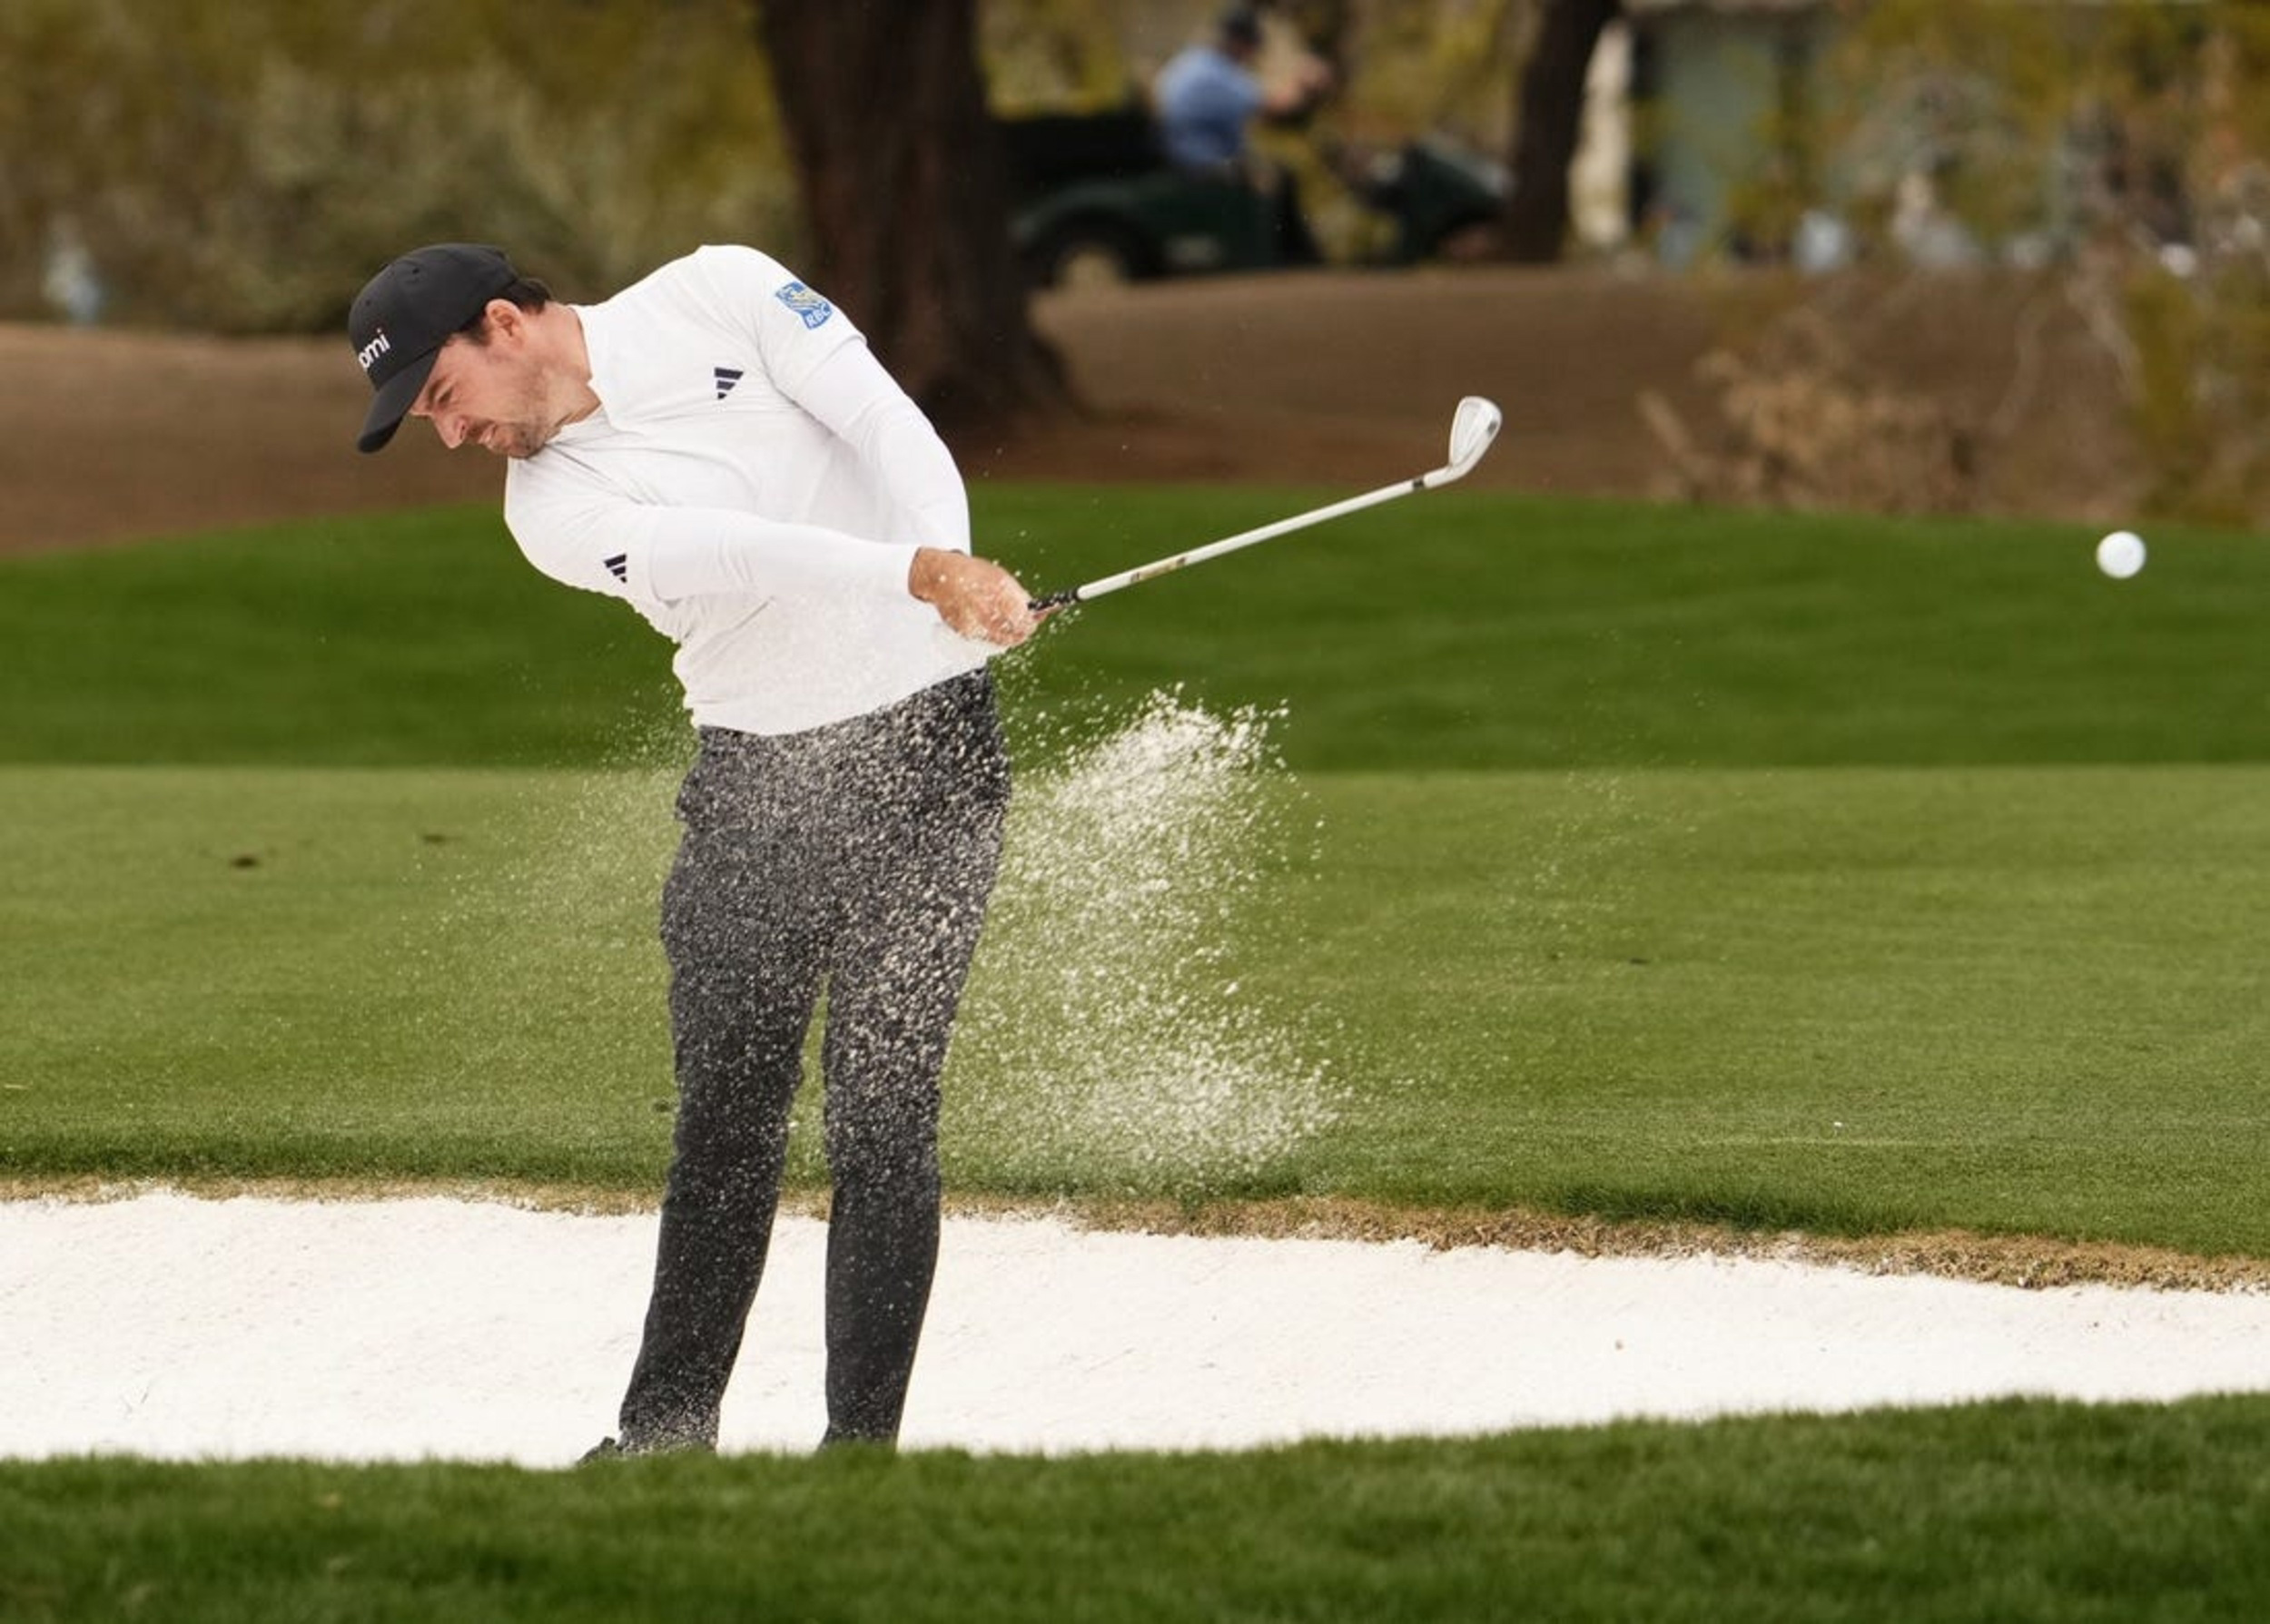 Andrew Novak, record-setting Nick Taylor tied for Phoenix Open lead